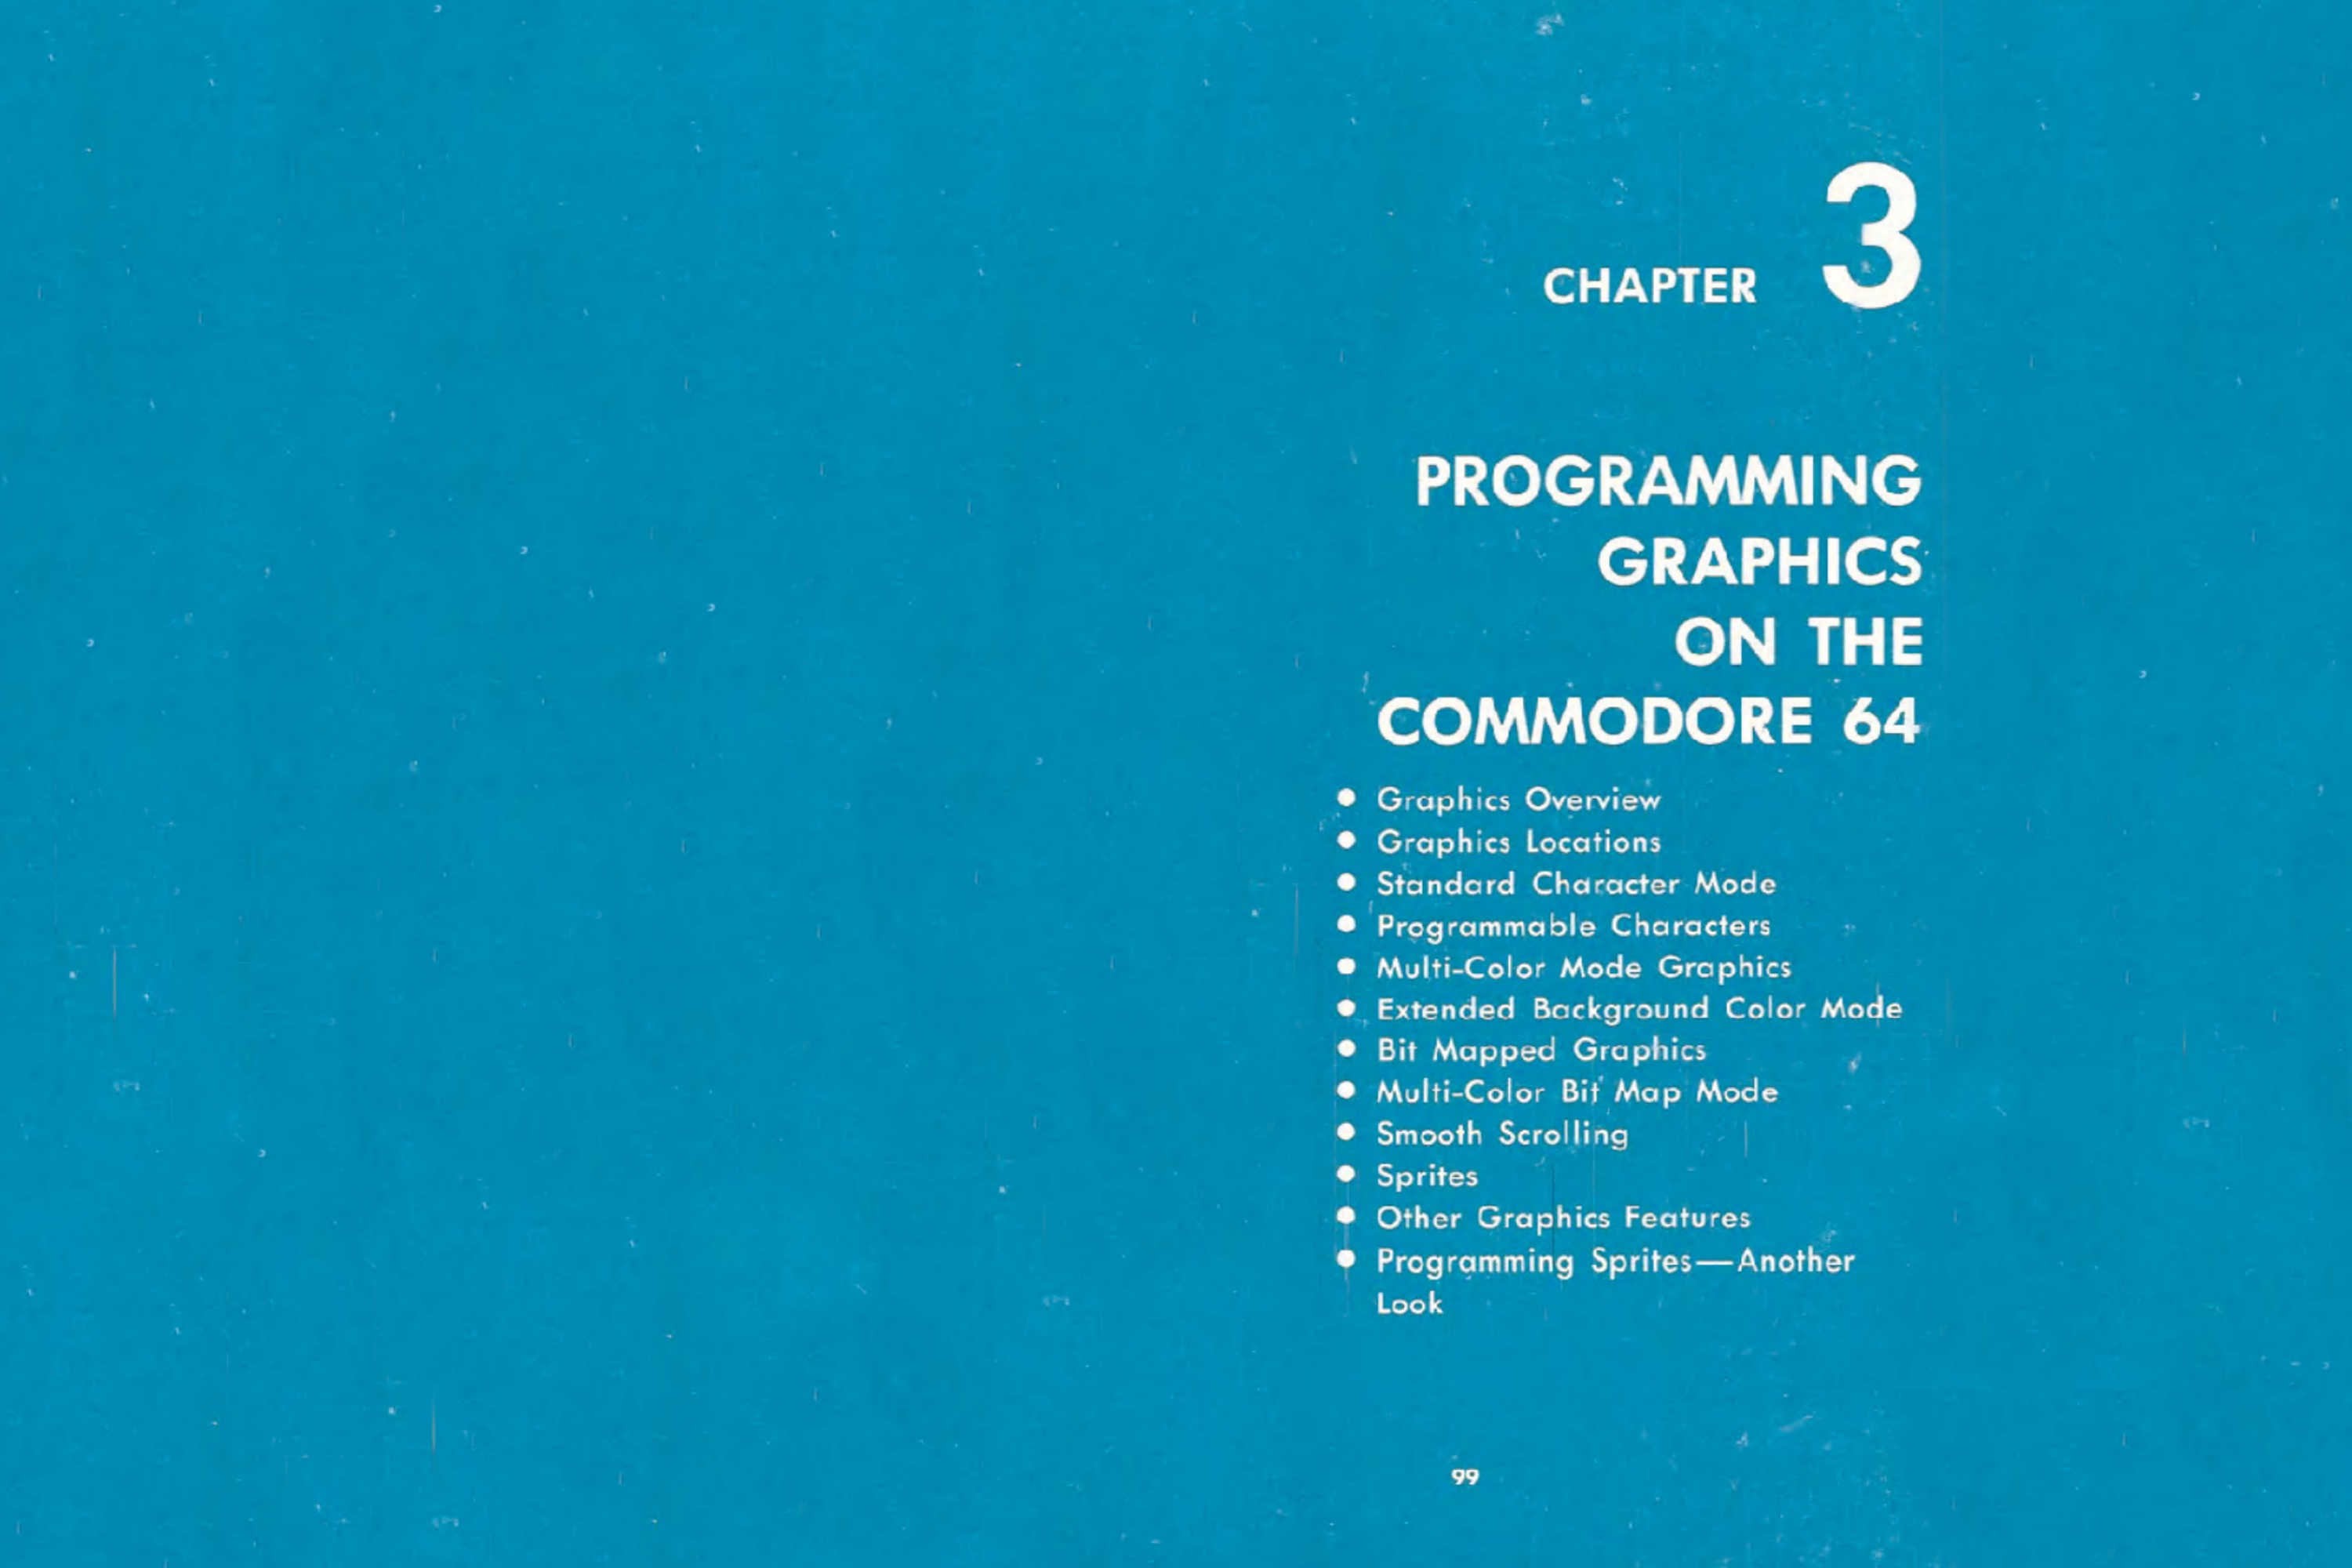 commodore64 graphics programming book chapter cover